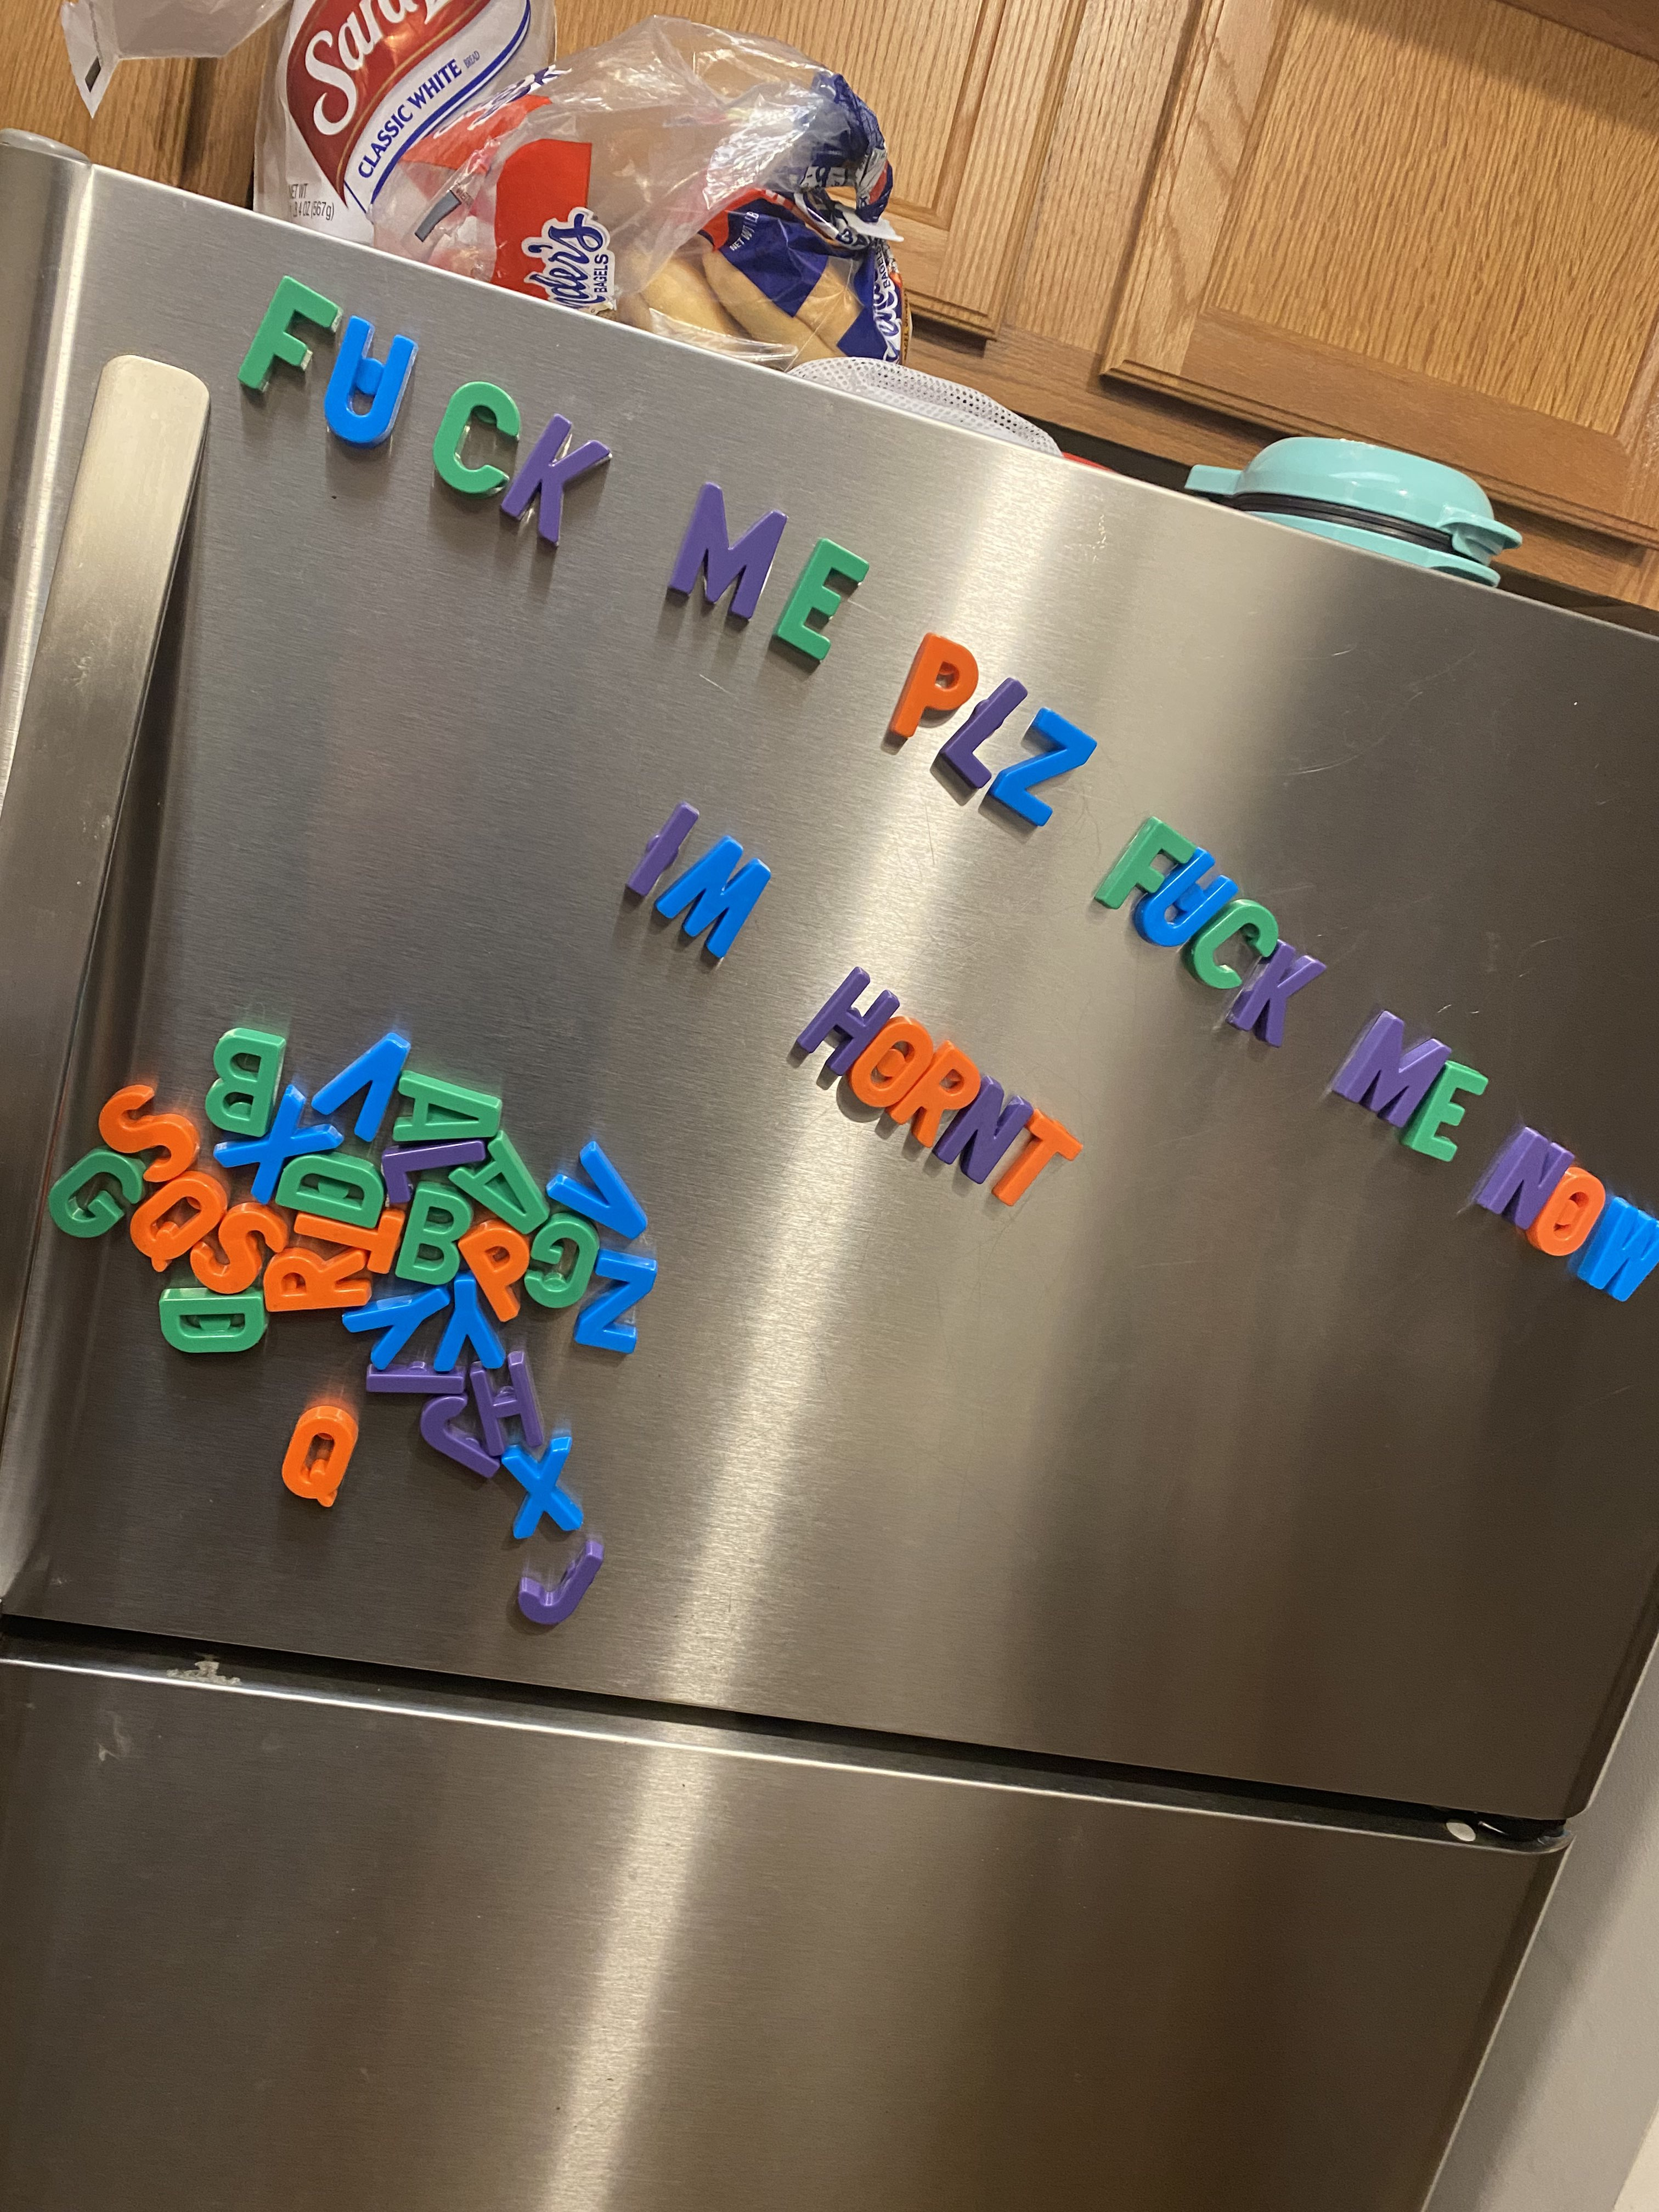 image of letters on a fridge saying 'Fuck me plz, fuck me now. im hornt'